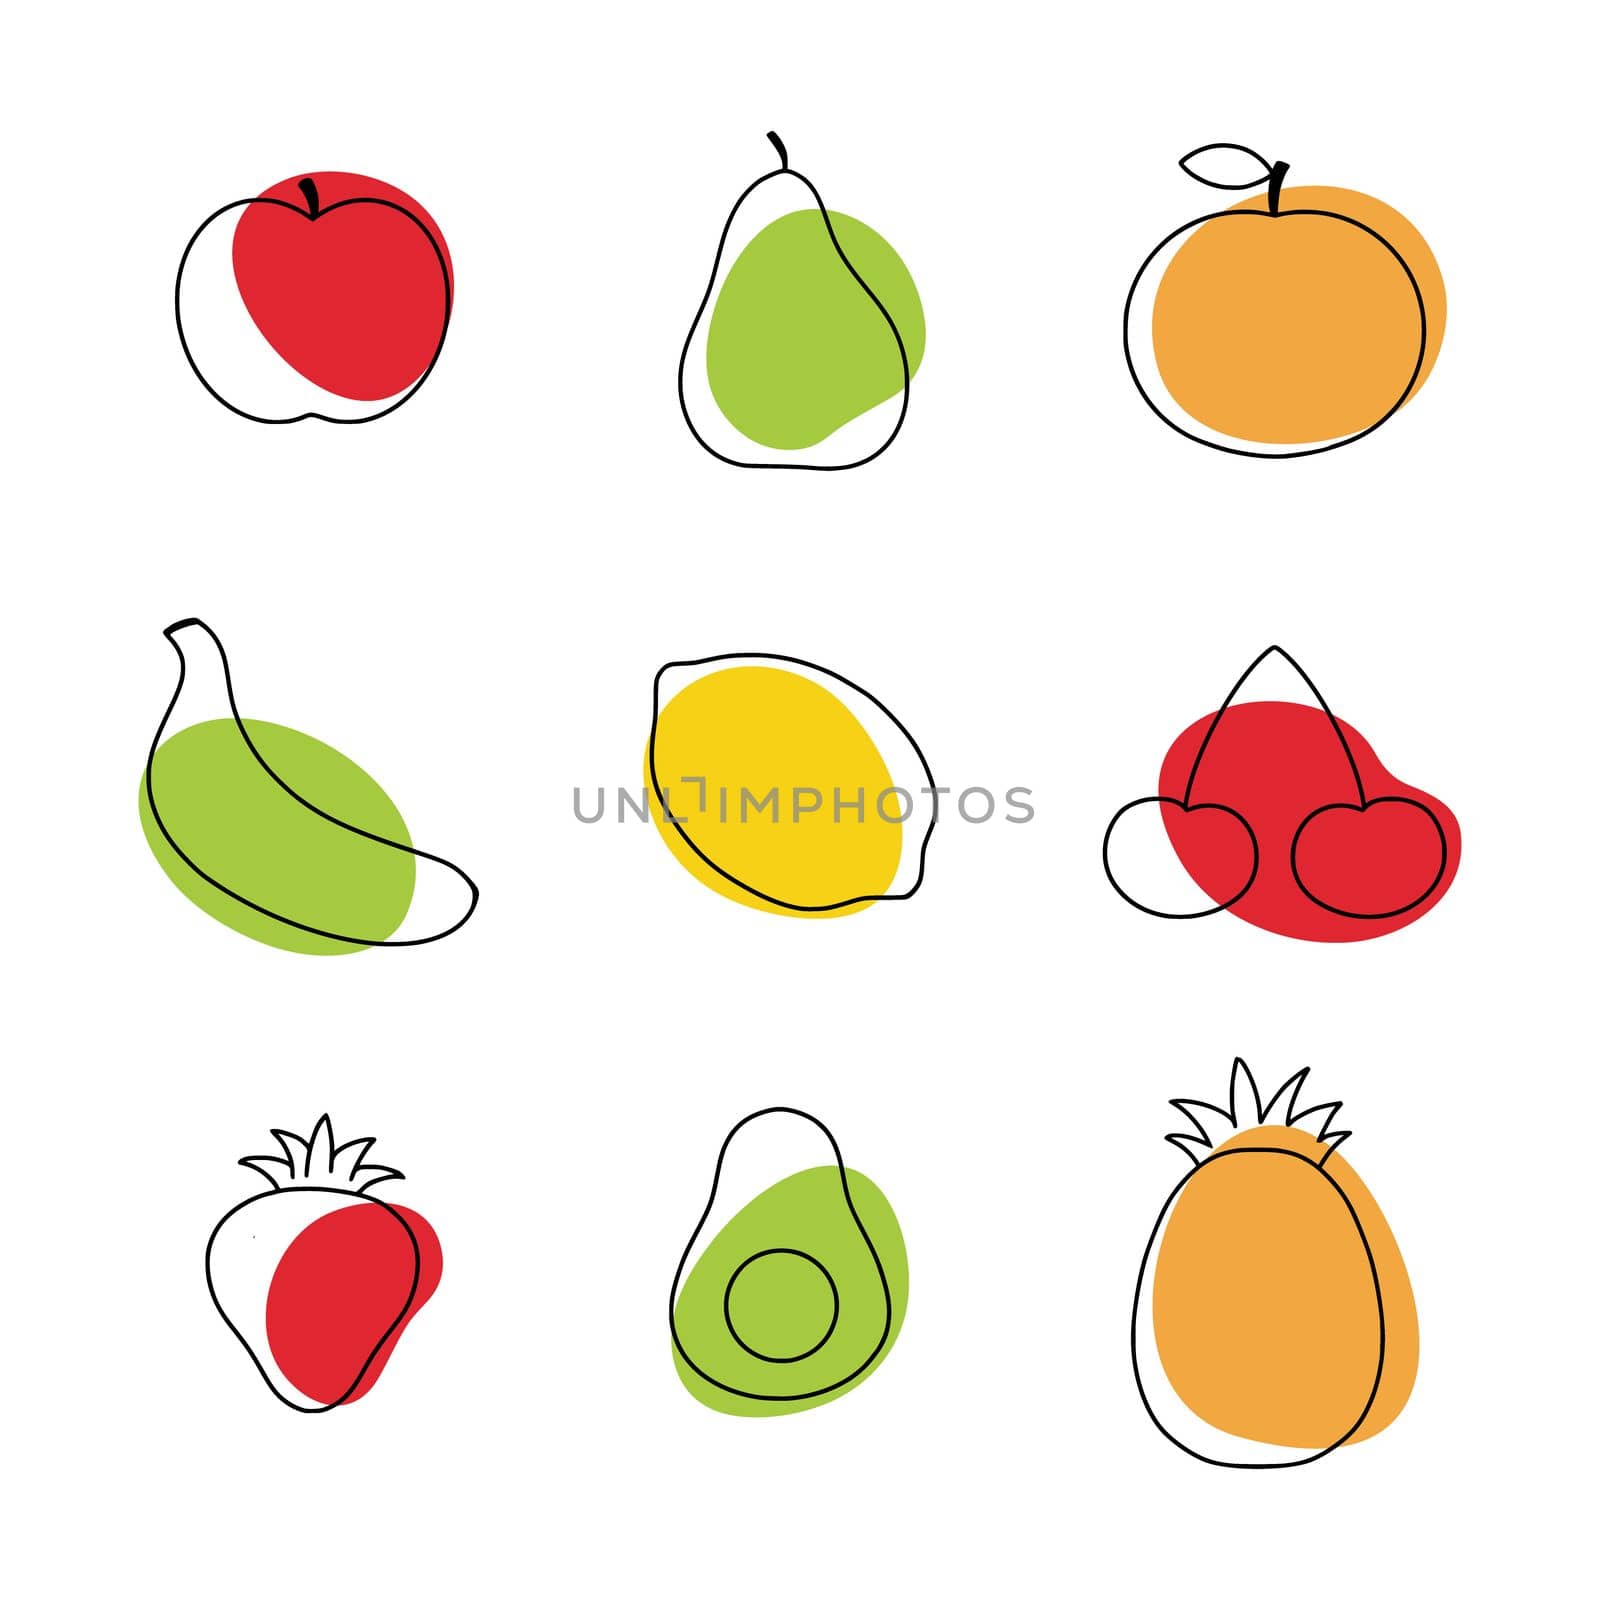 Fruit and berries in the style of doodle. A linear drawing with healthy fruits.